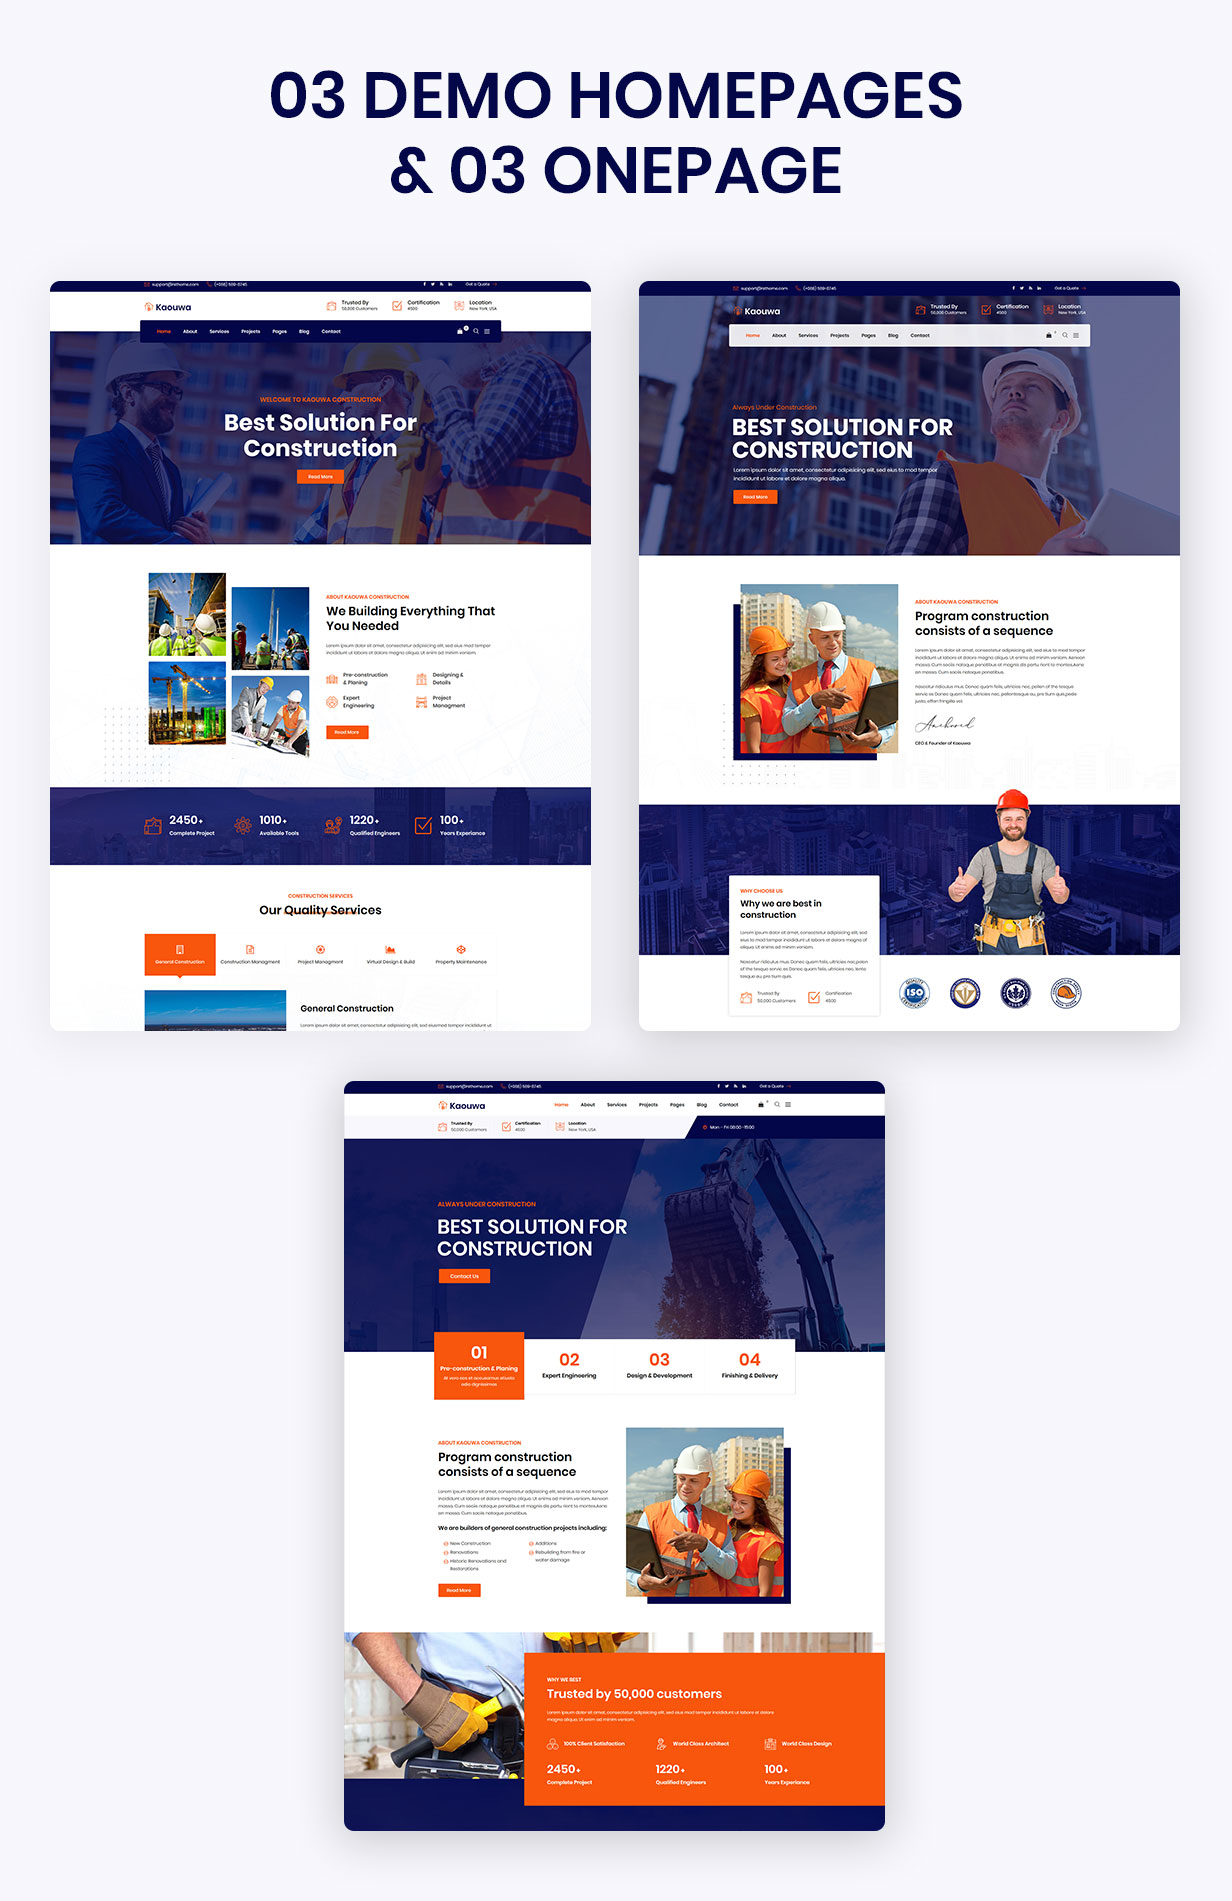 Demo homepages examples.